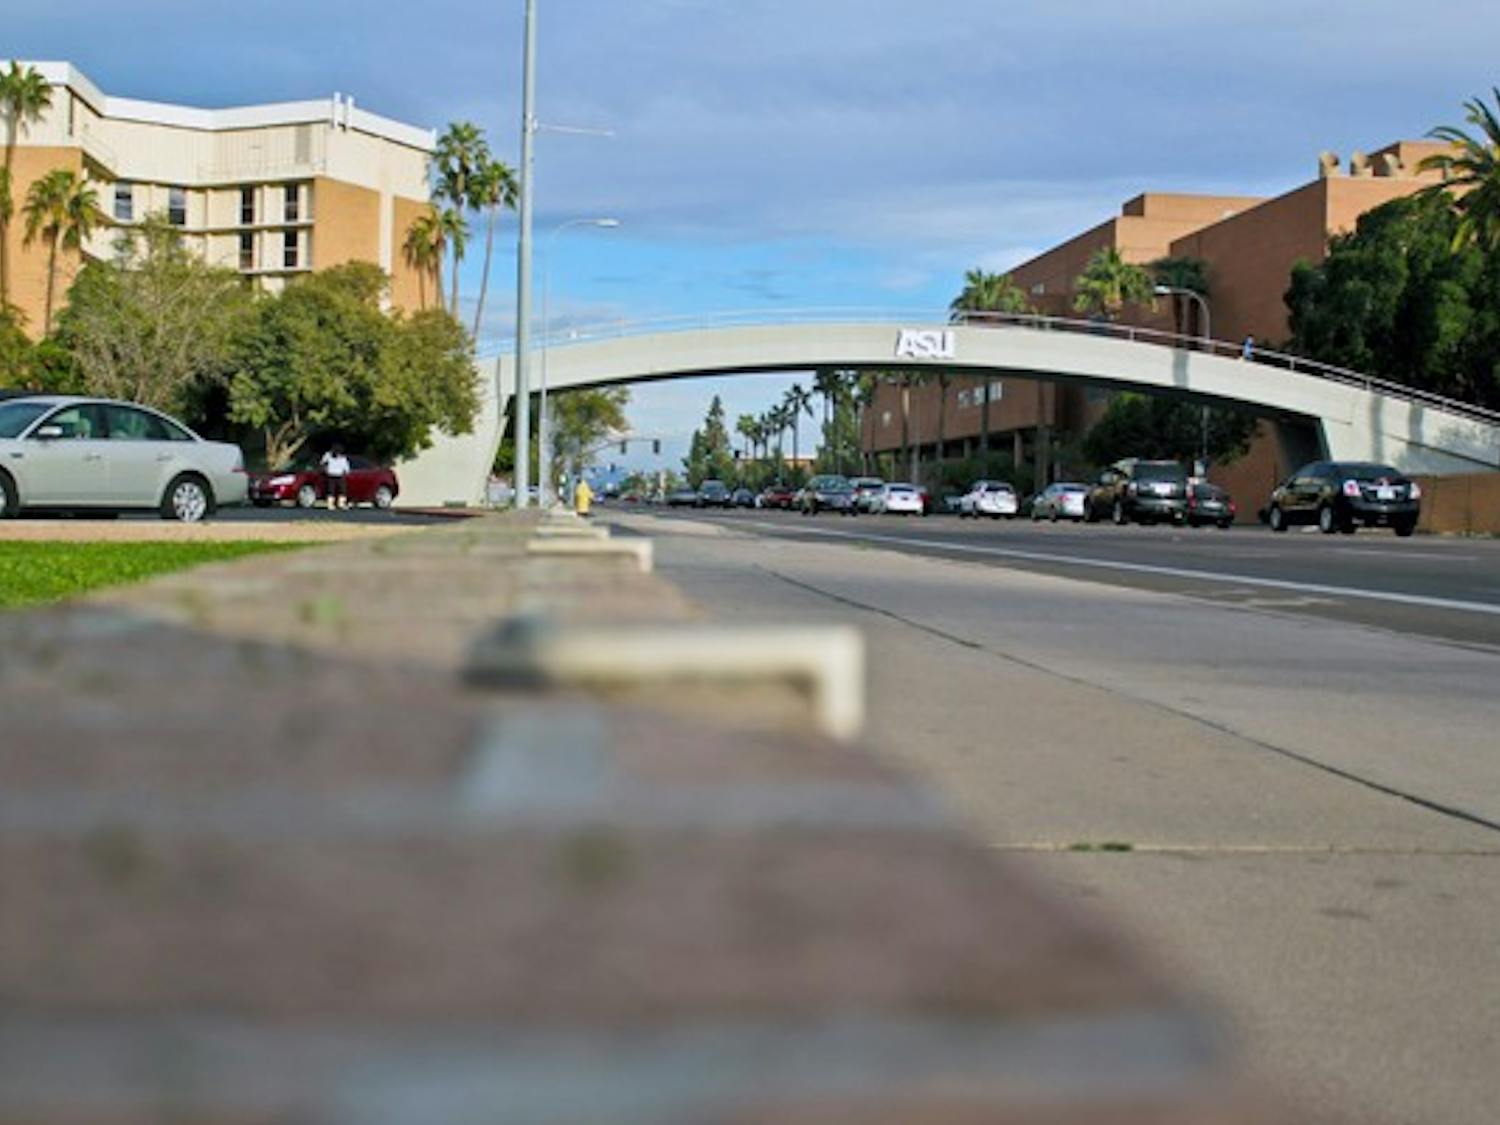 A view of University Bridge from the ground on a beautiful Arizona day. (Photo by Marissa Krings)